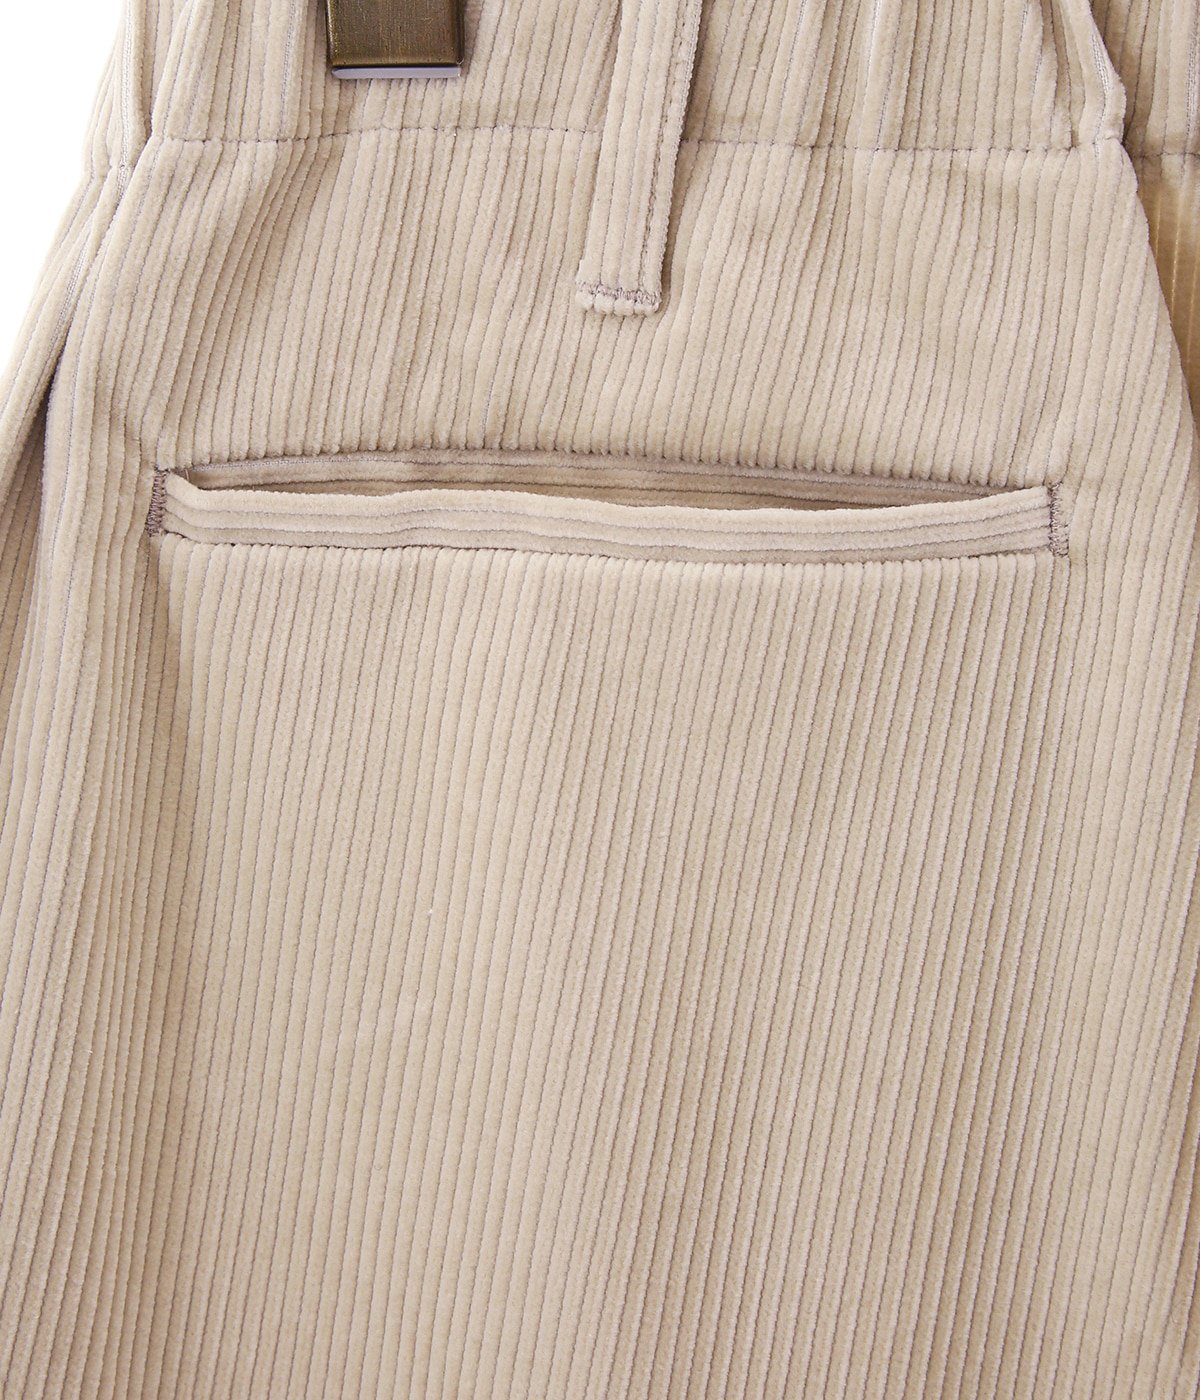 marka(マーカ) 2TUCK STRAIGHT FIT TROUSERS - 9wale corduroy 